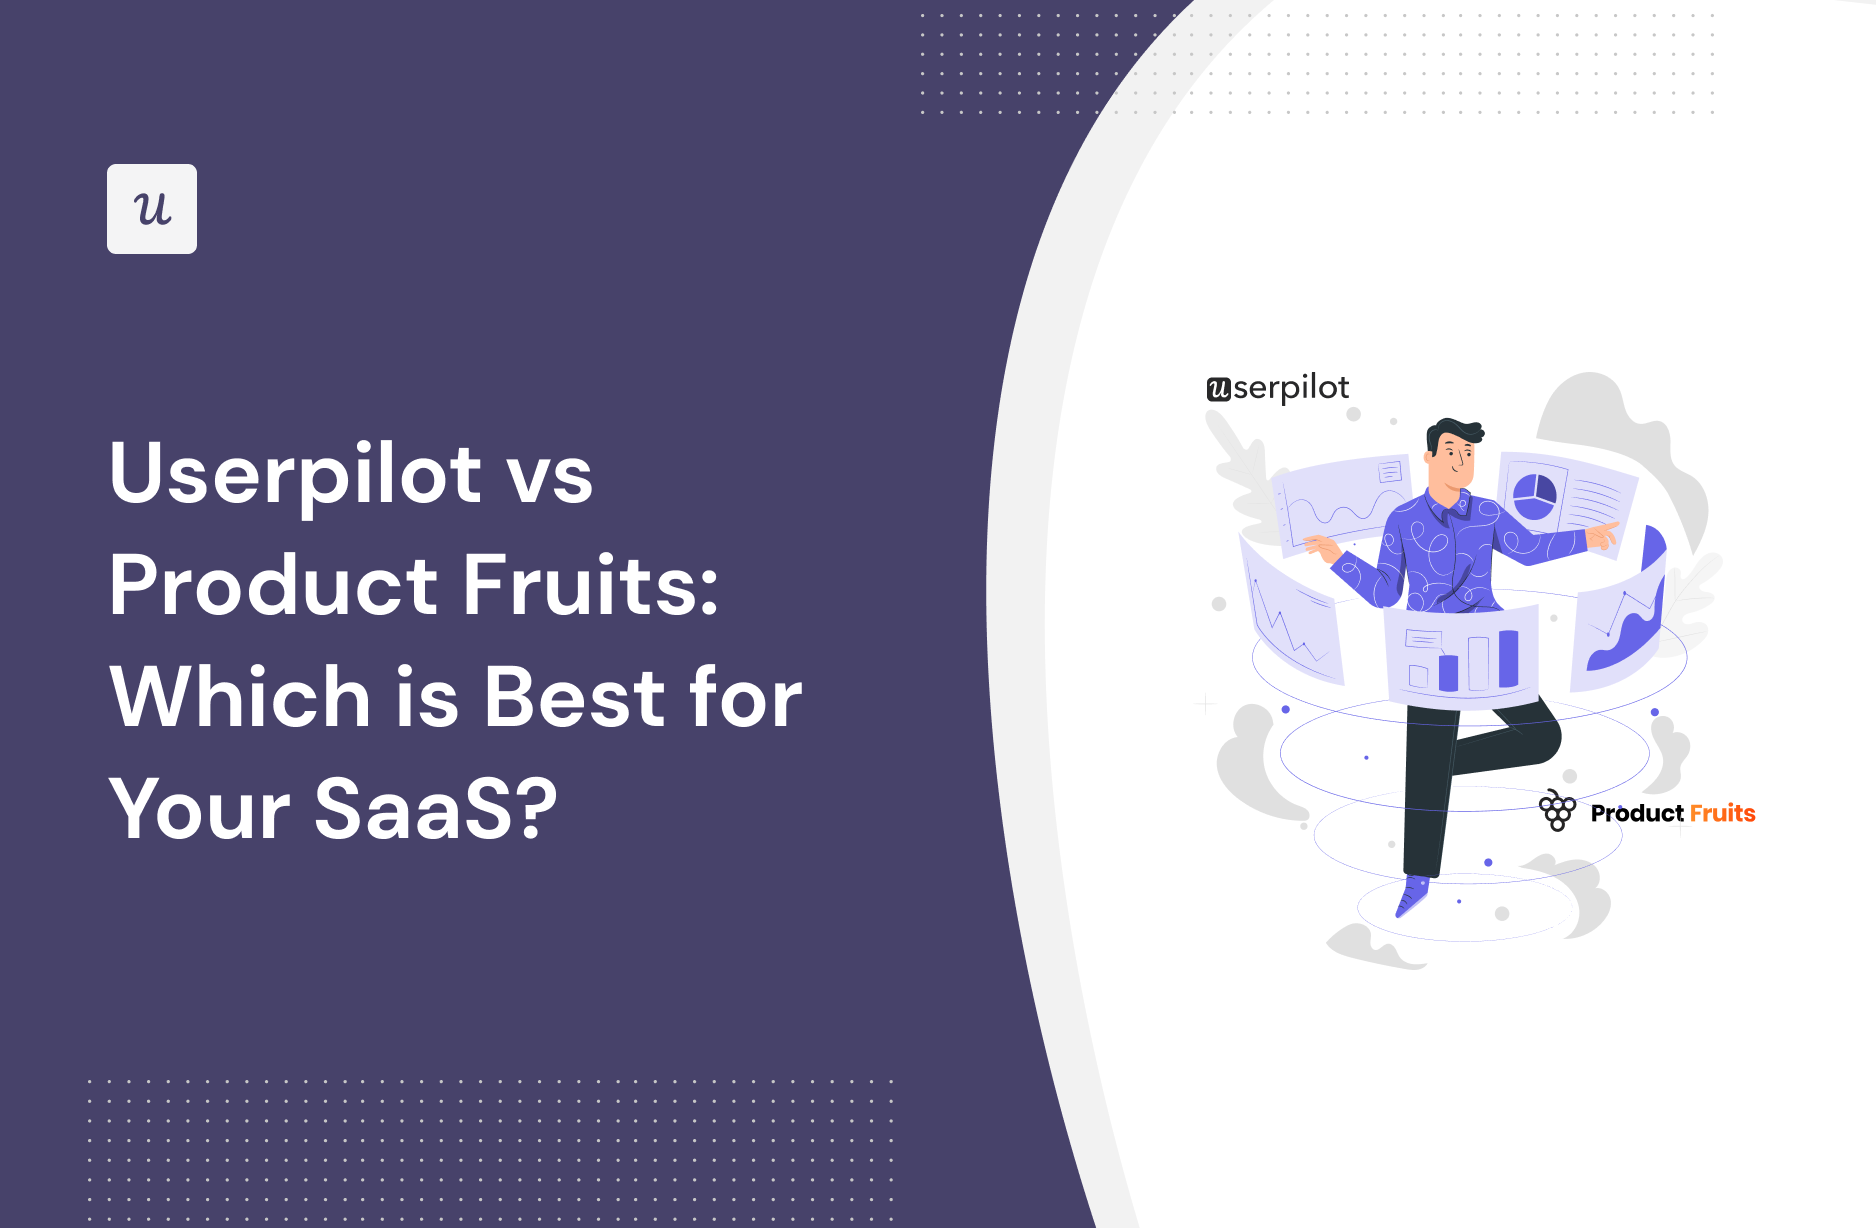 Userpilot vs Product Fruits: Which Is Best for Your SaaS?